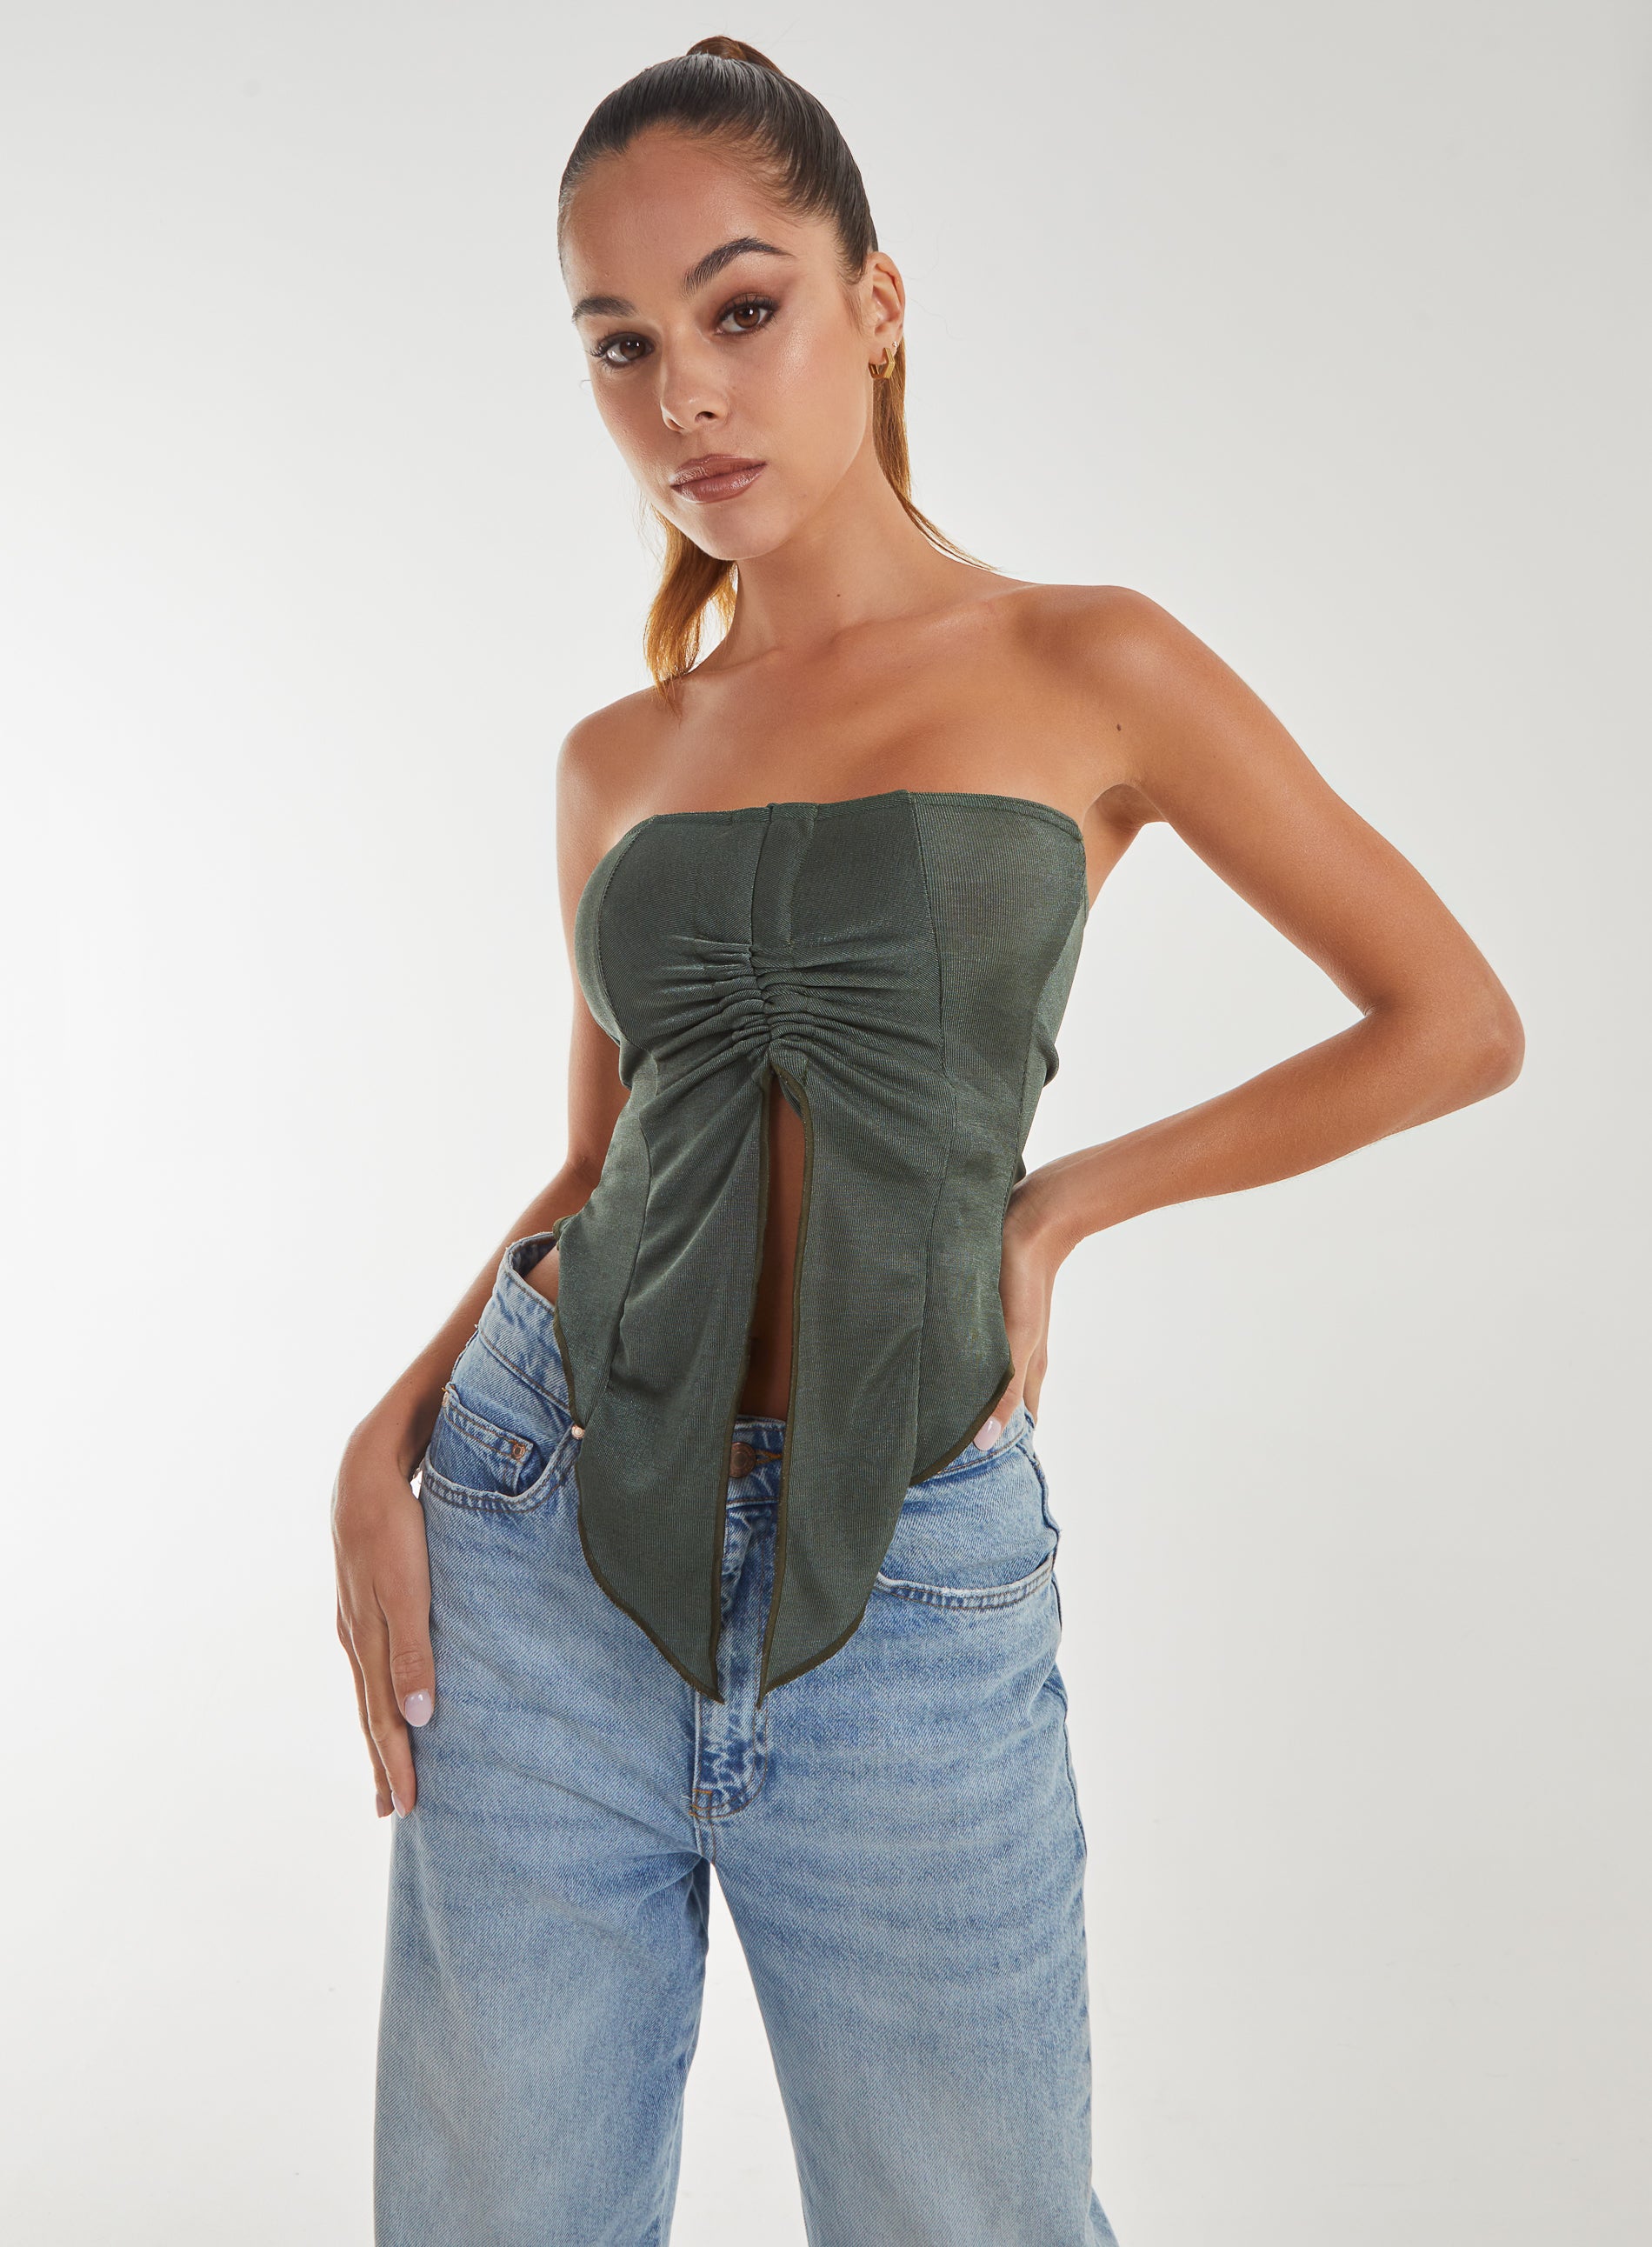 Butterfly Effect Top  - L  - OLIVE